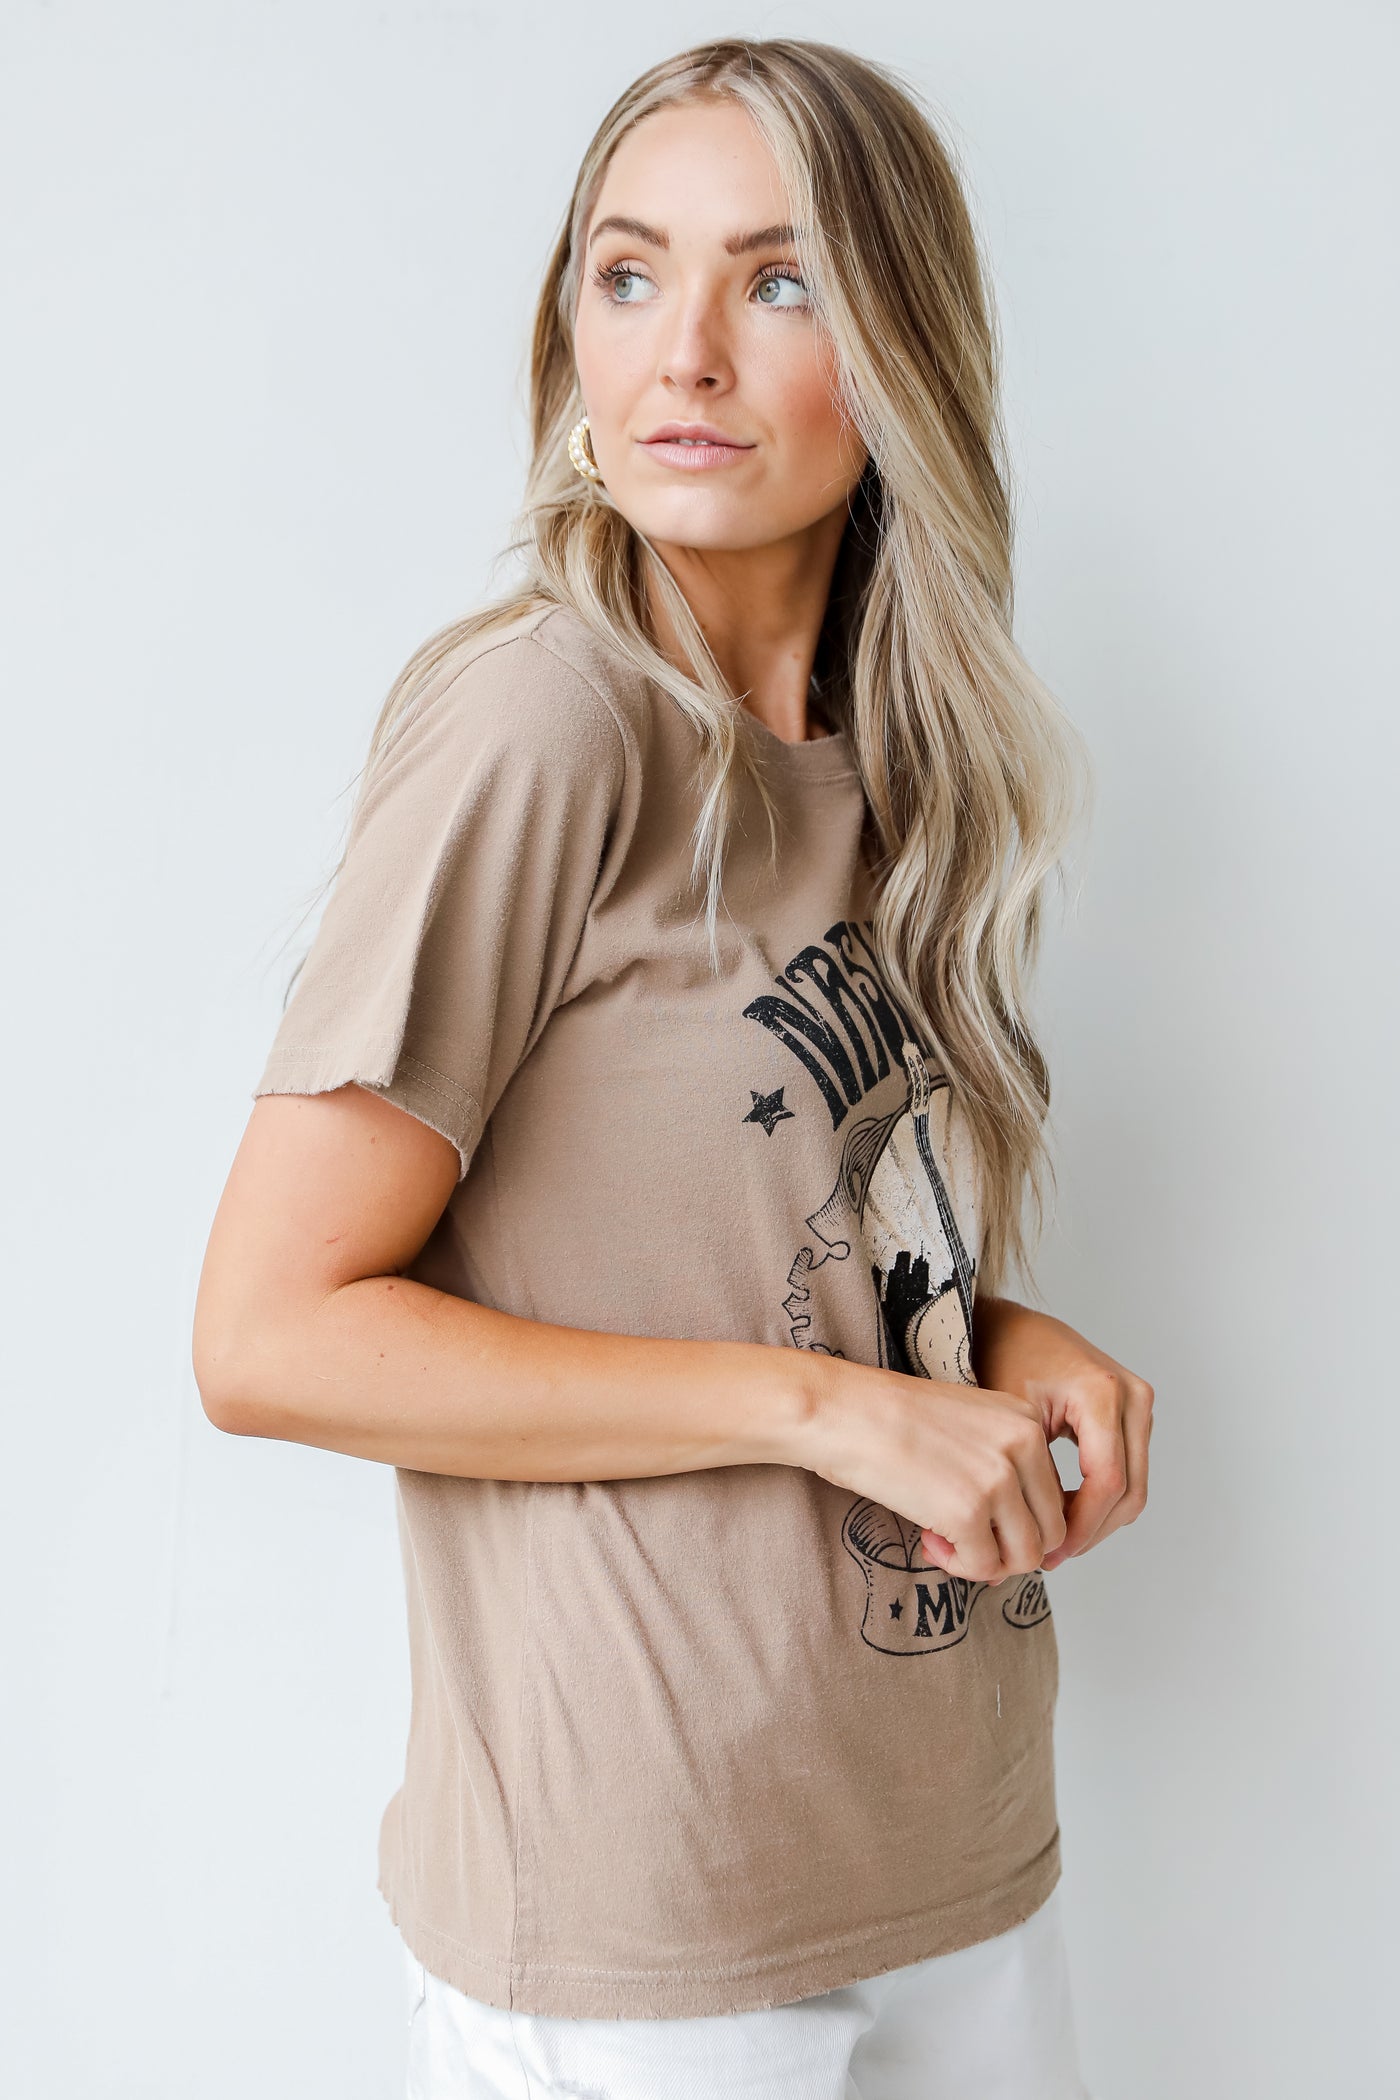 Nashville Vintage Graphic Tee in taupe side view